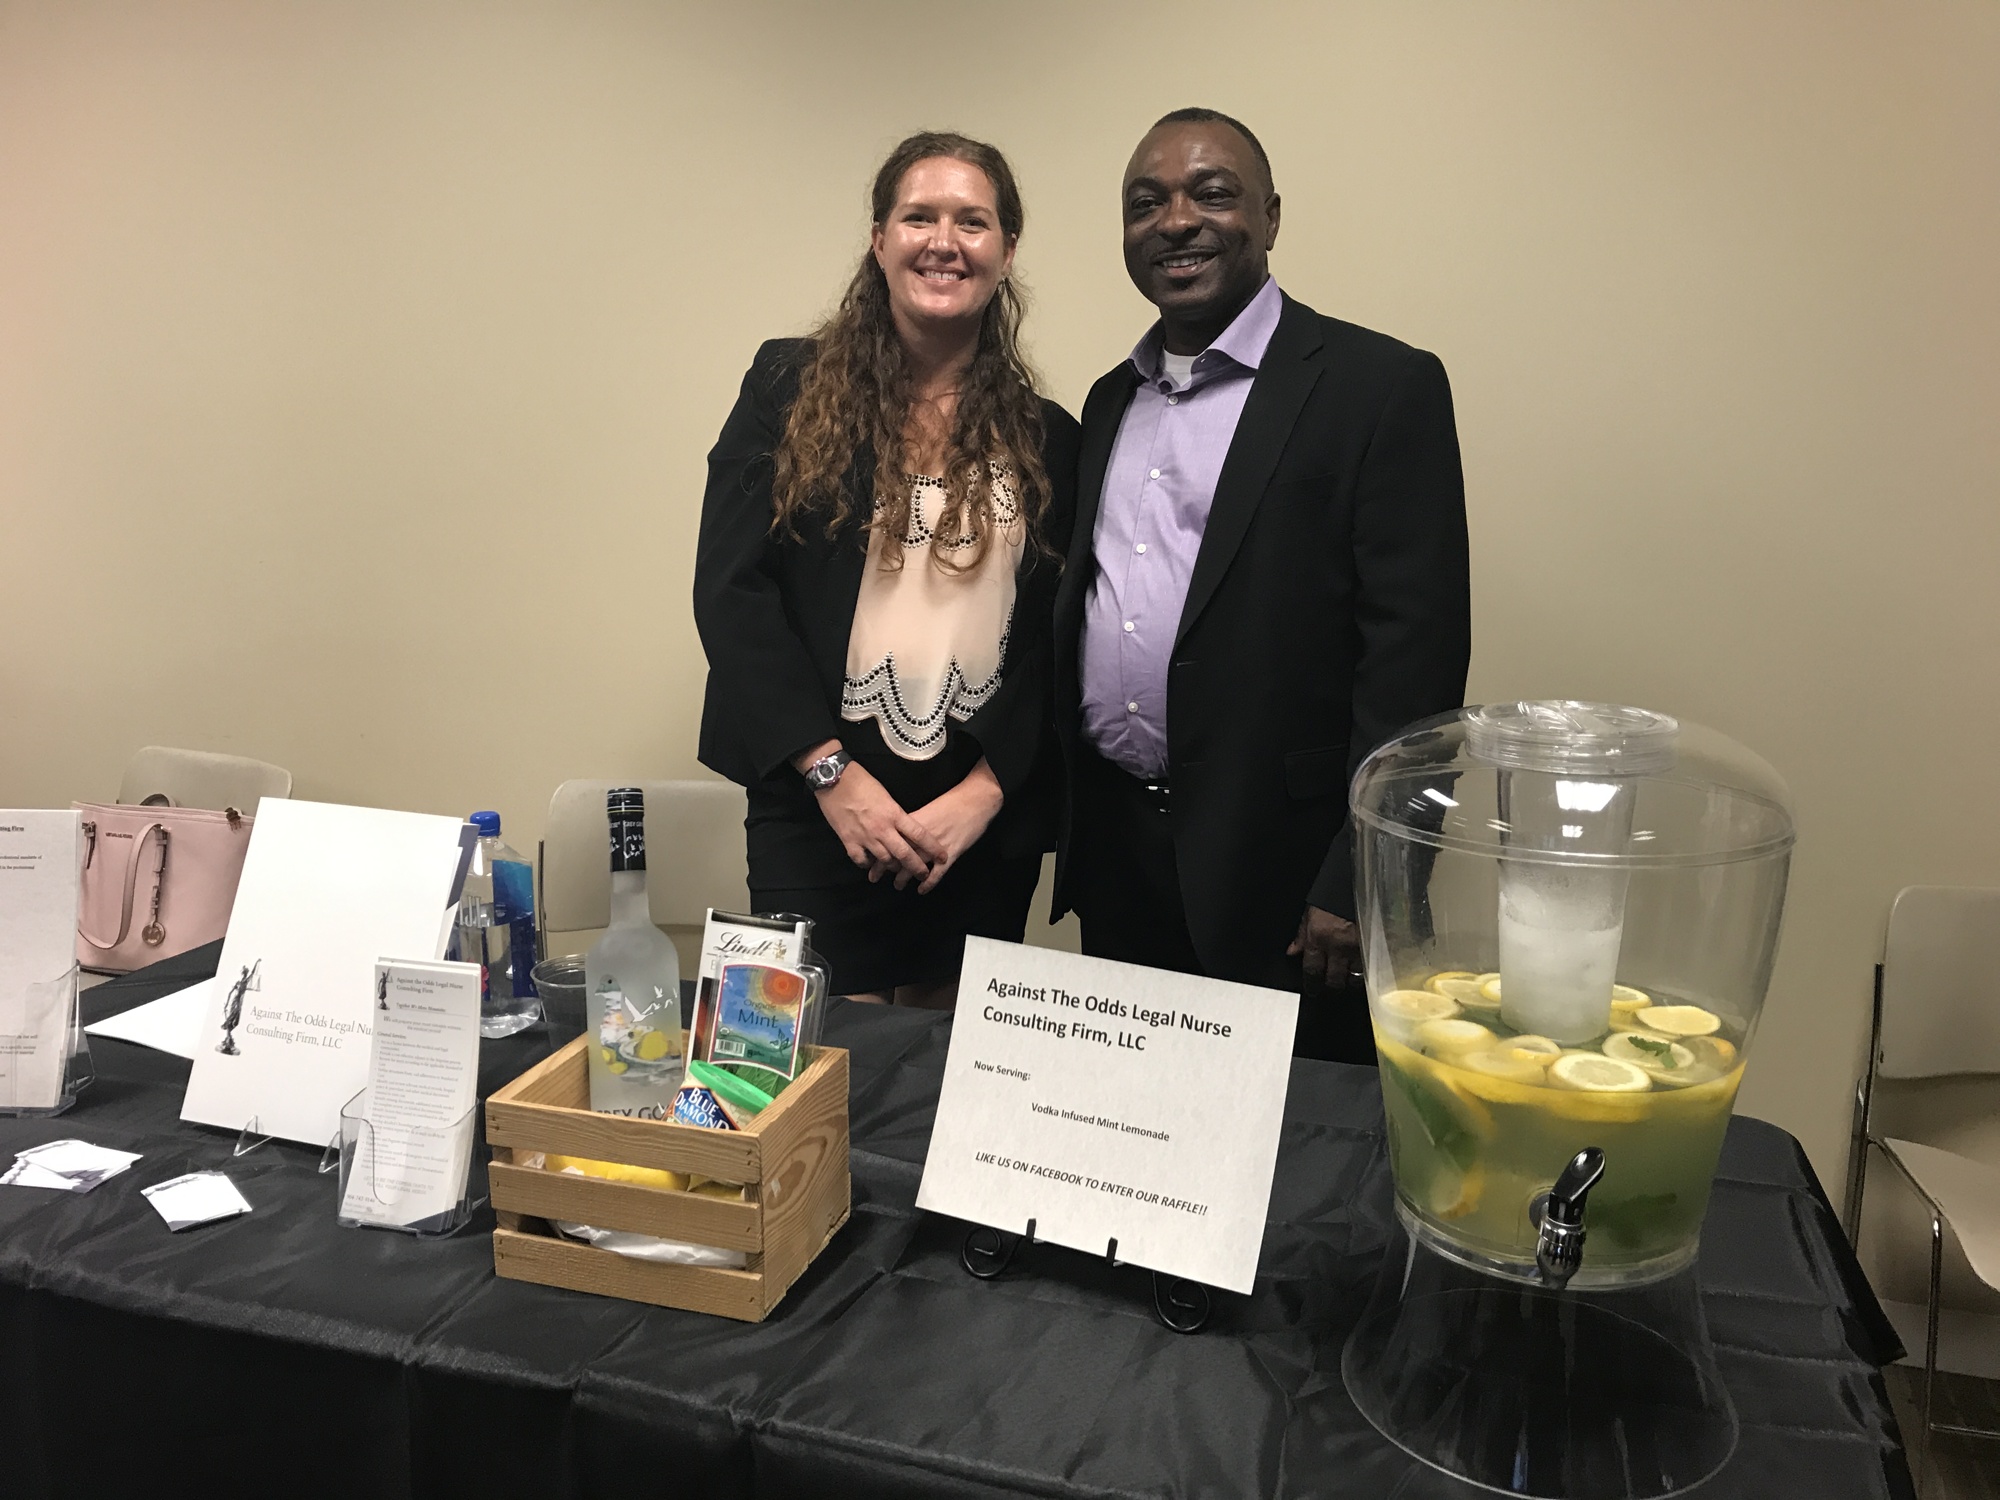 Theresa Charleston and Anthony Fisher of Against the Odds Legal Nurse Consulting Firm hosted the Open Bar event.